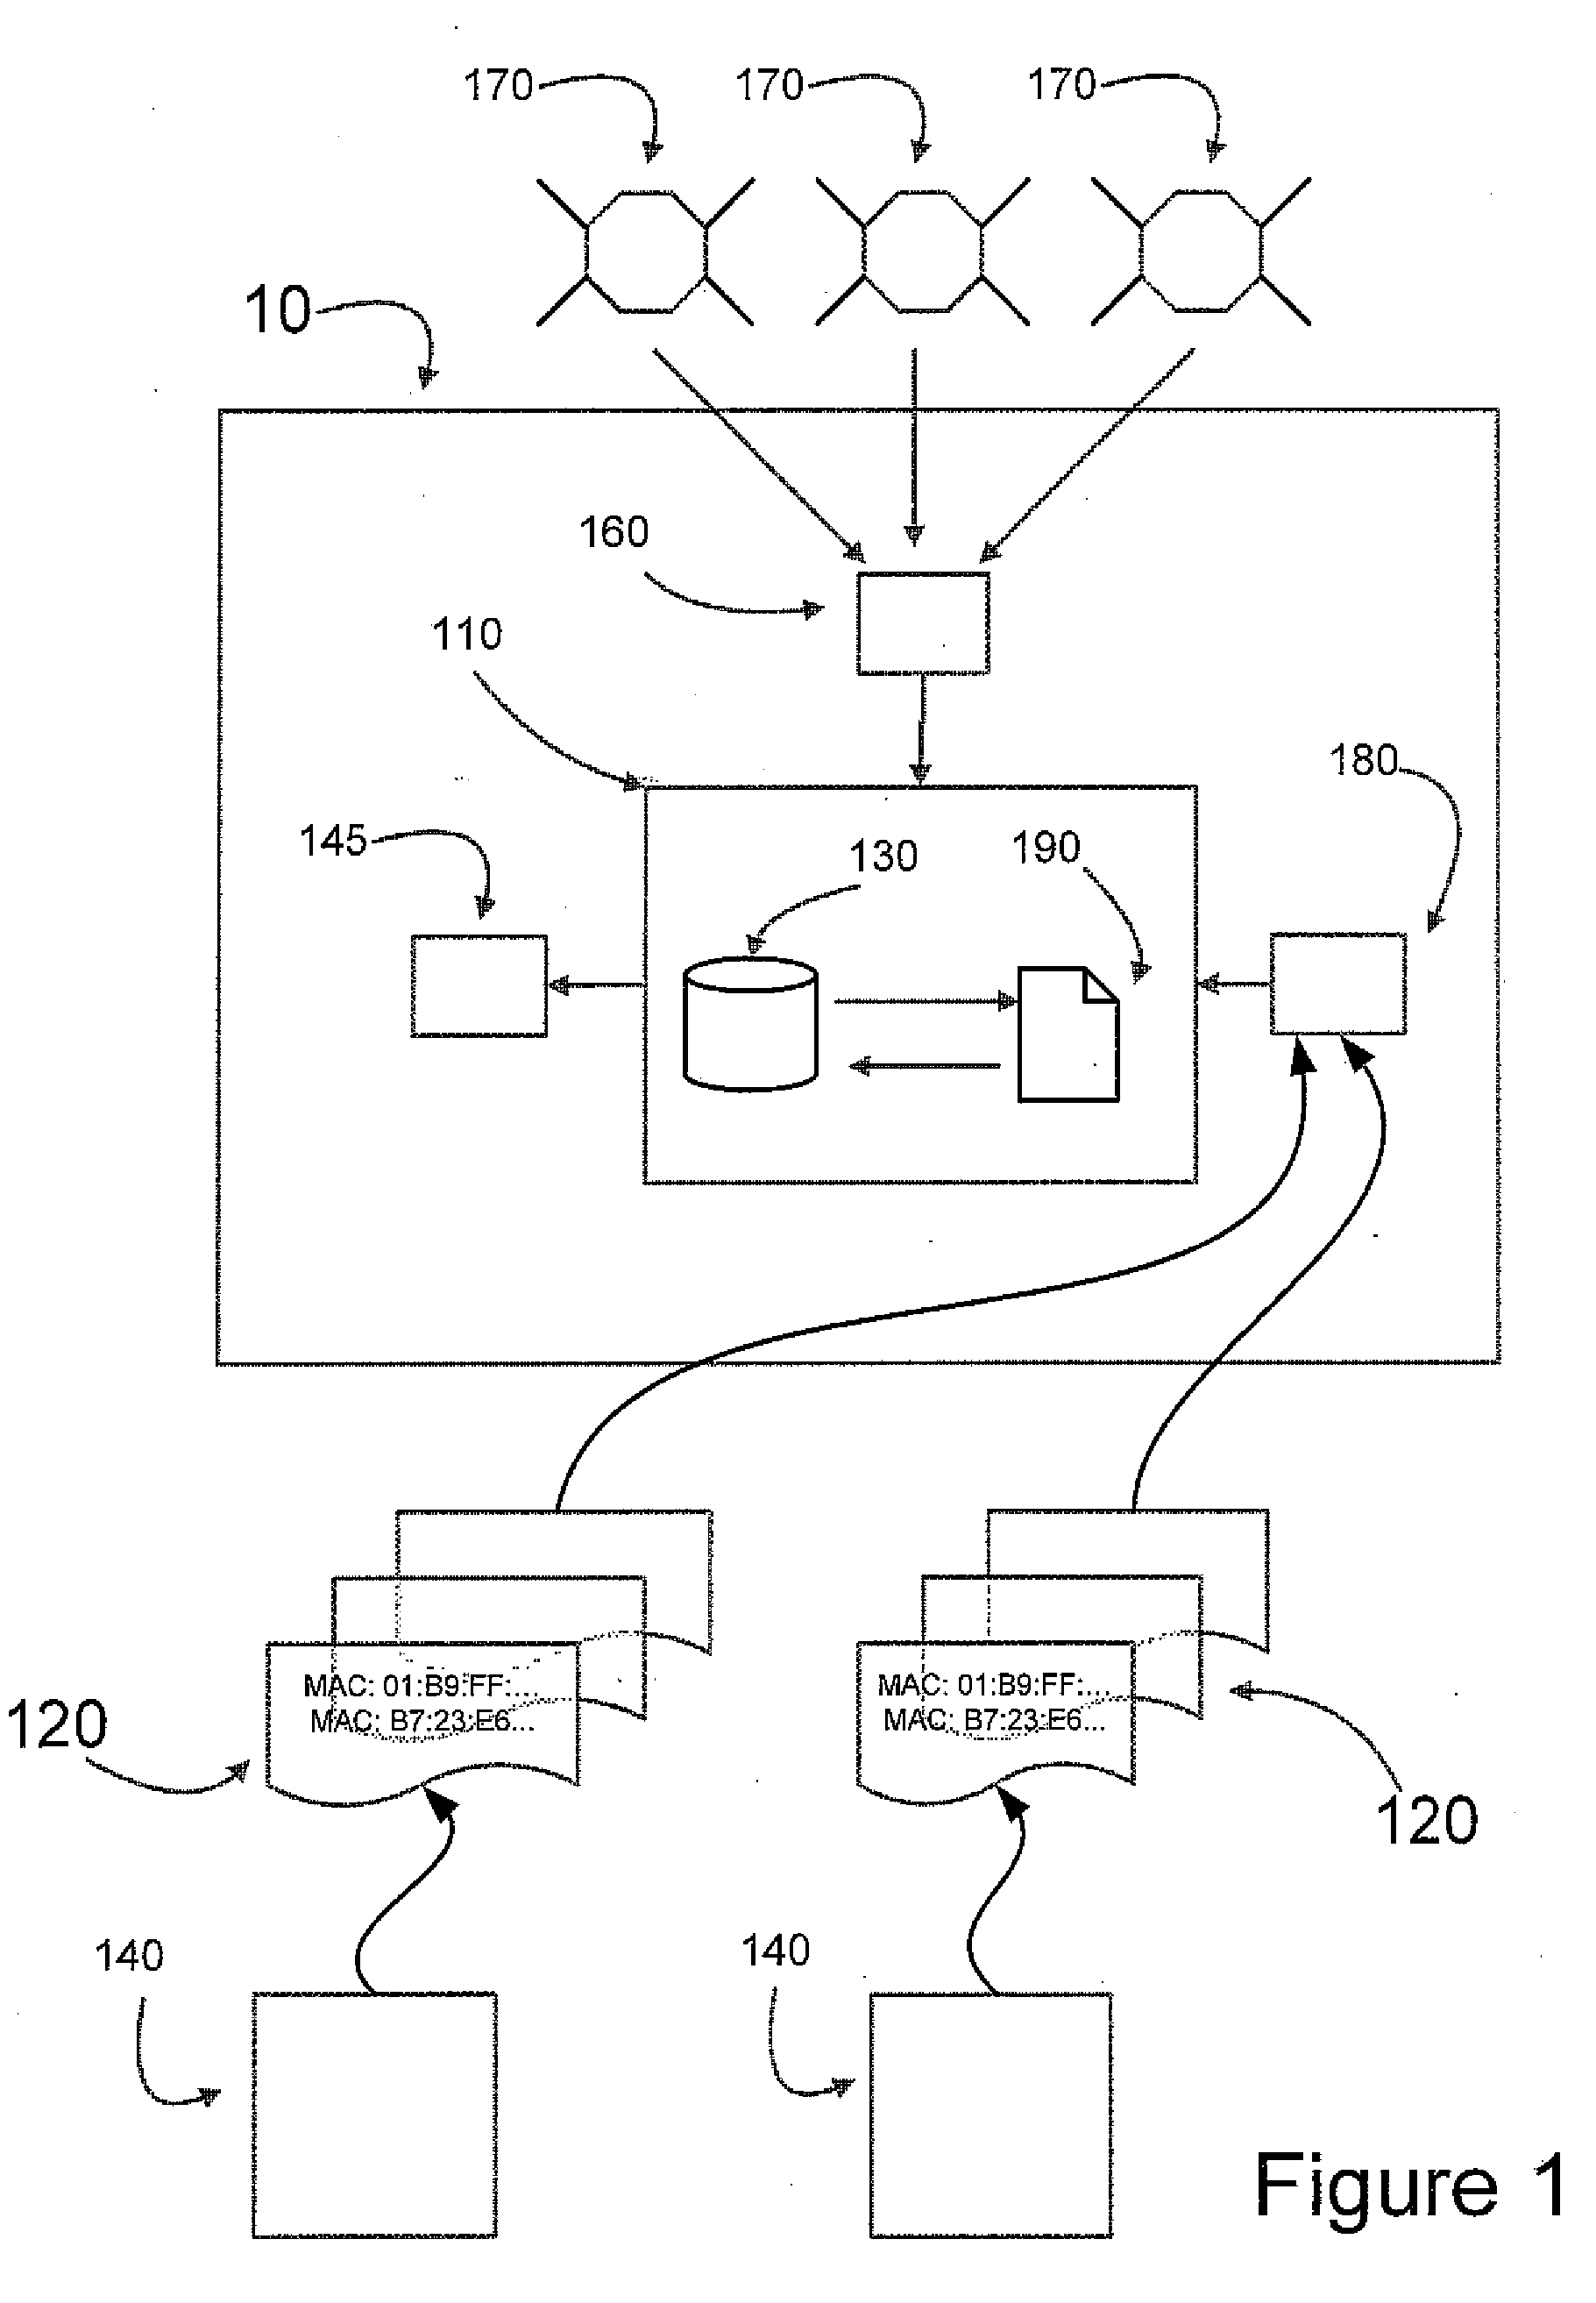 Scanning Apparatus and System for Tracking Computer Hardware